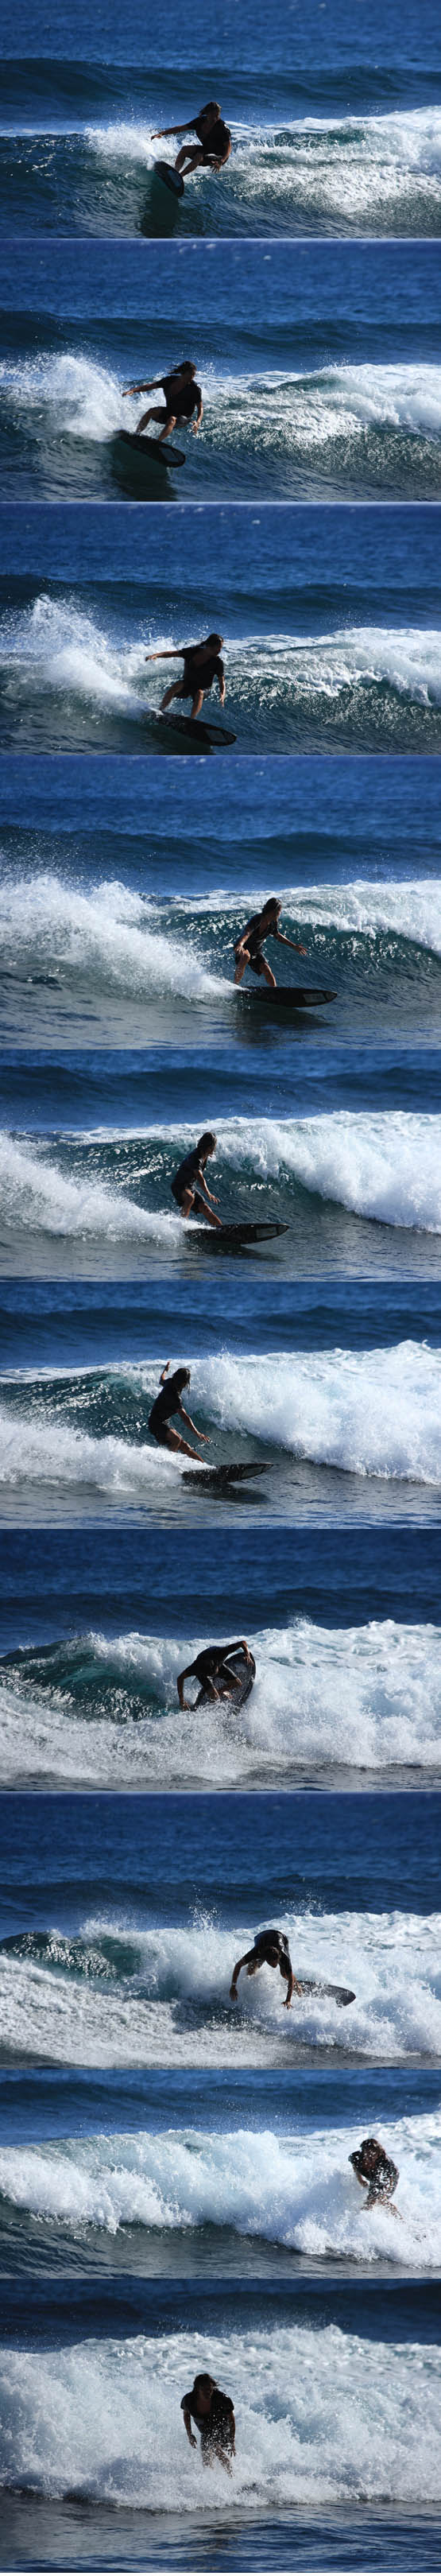 2010_NH_Surfing_SQ_T4065